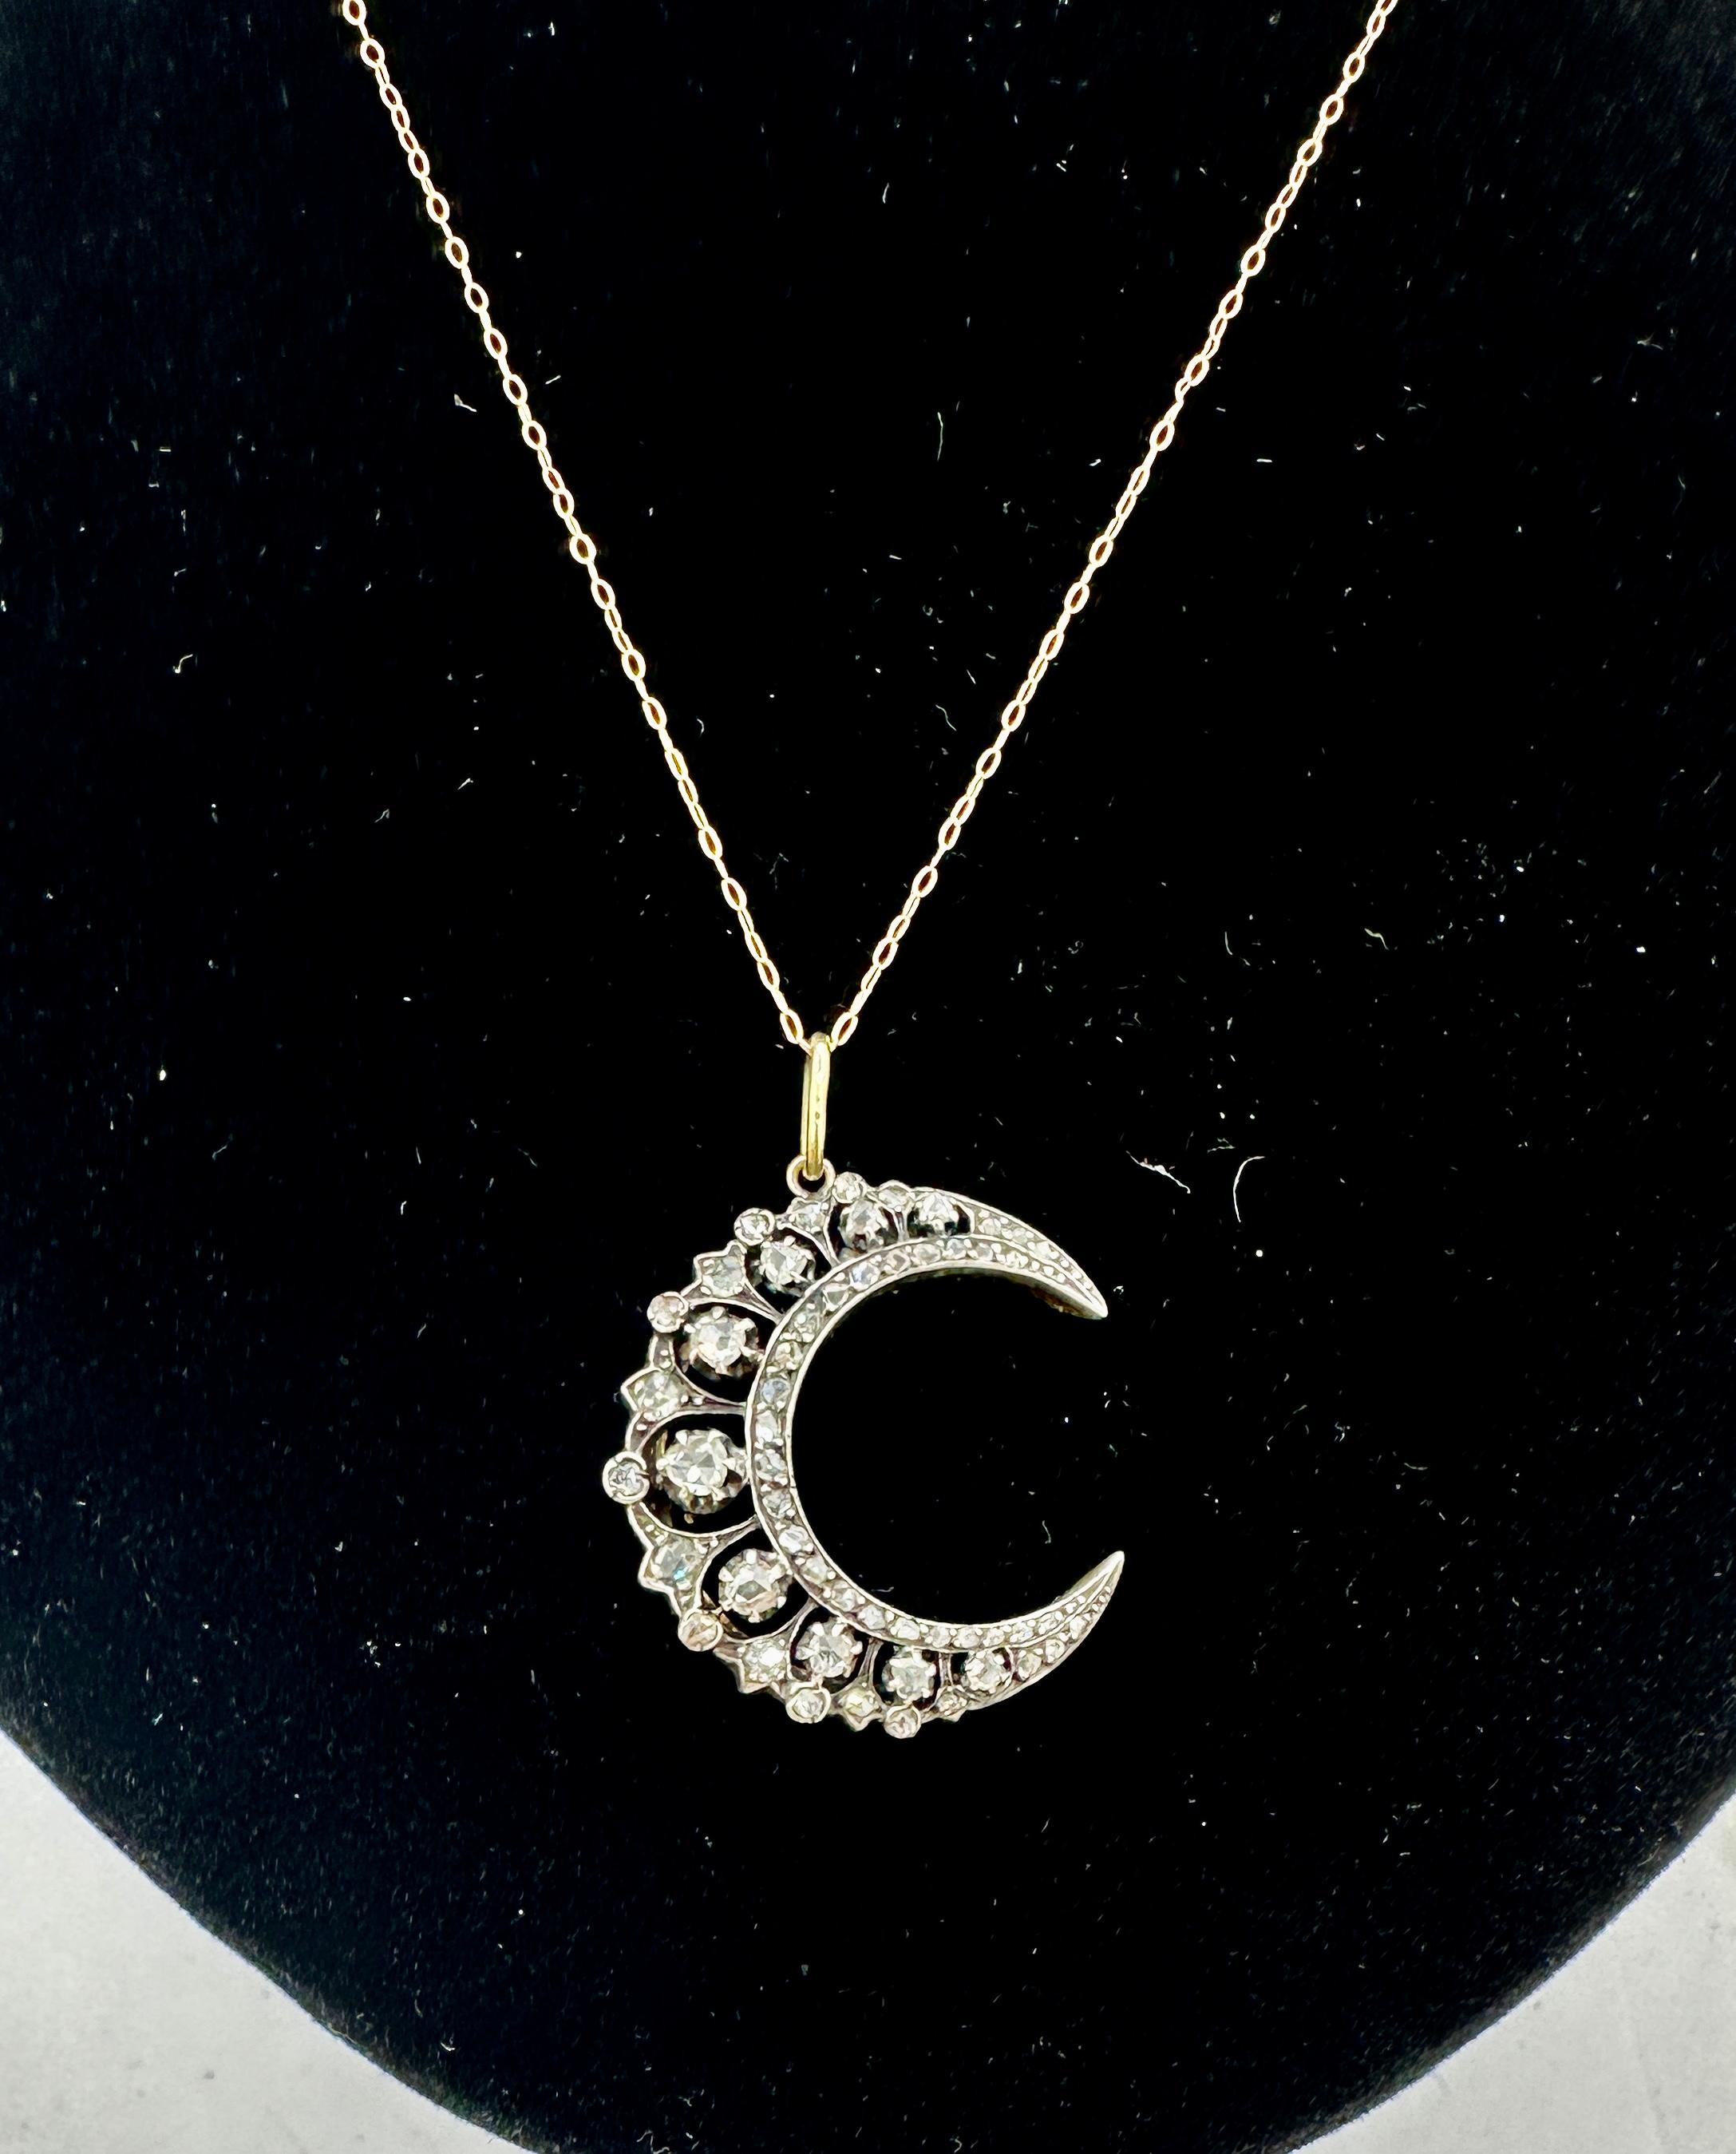 Rose Cut Diamond Platinum Crescent Moon Pendant Necklace French Belle Epoque In Excellent Condition For Sale In New York, NY